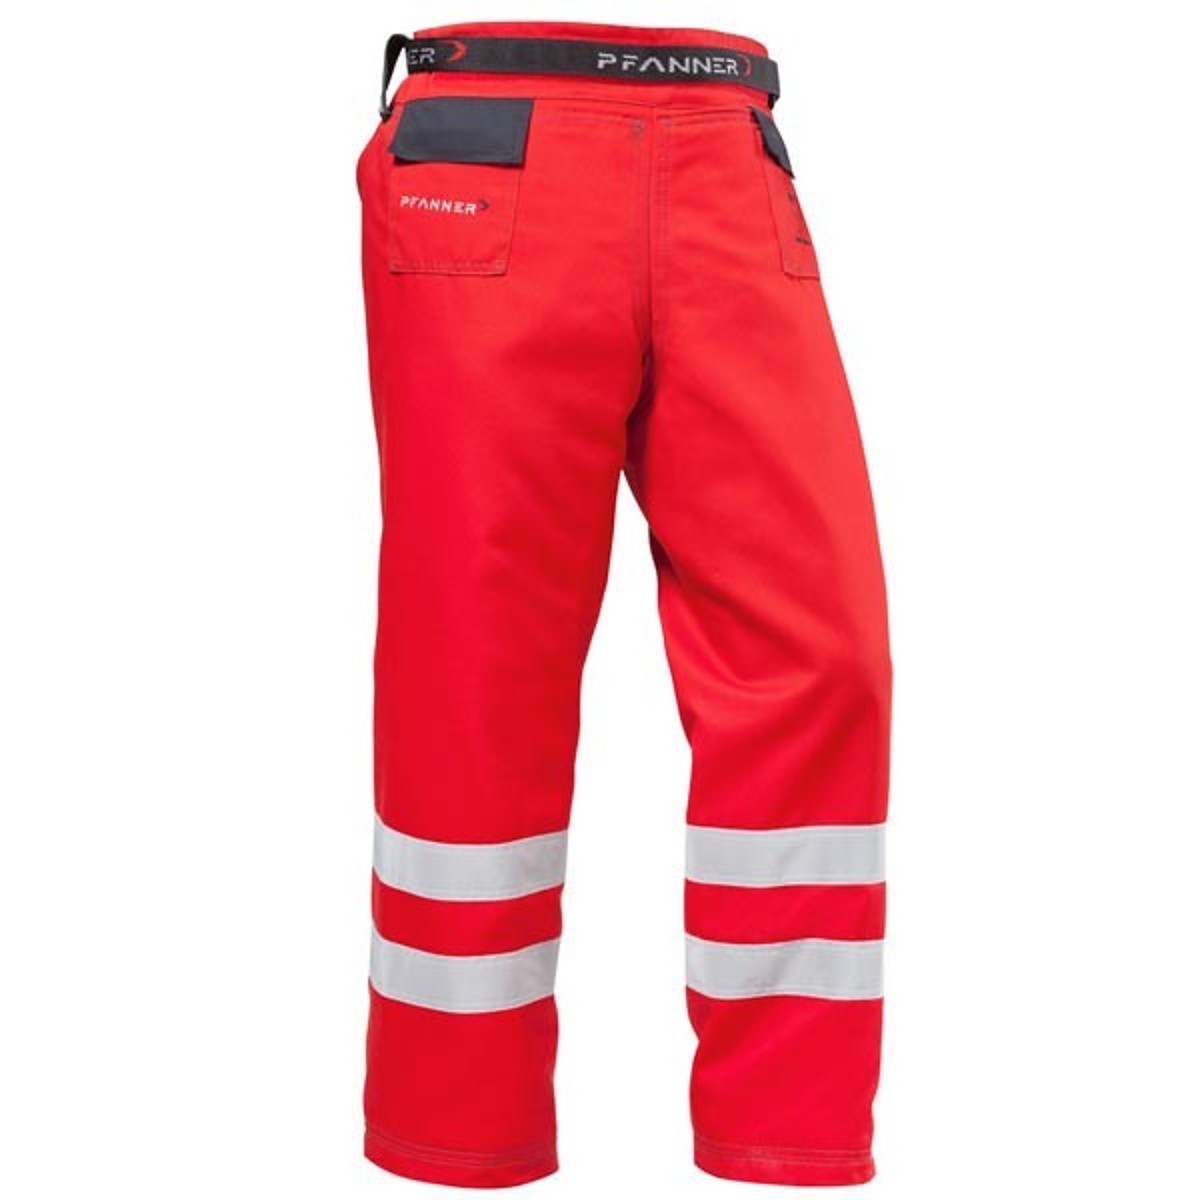 Pfanner Cut protection leg warmers type A